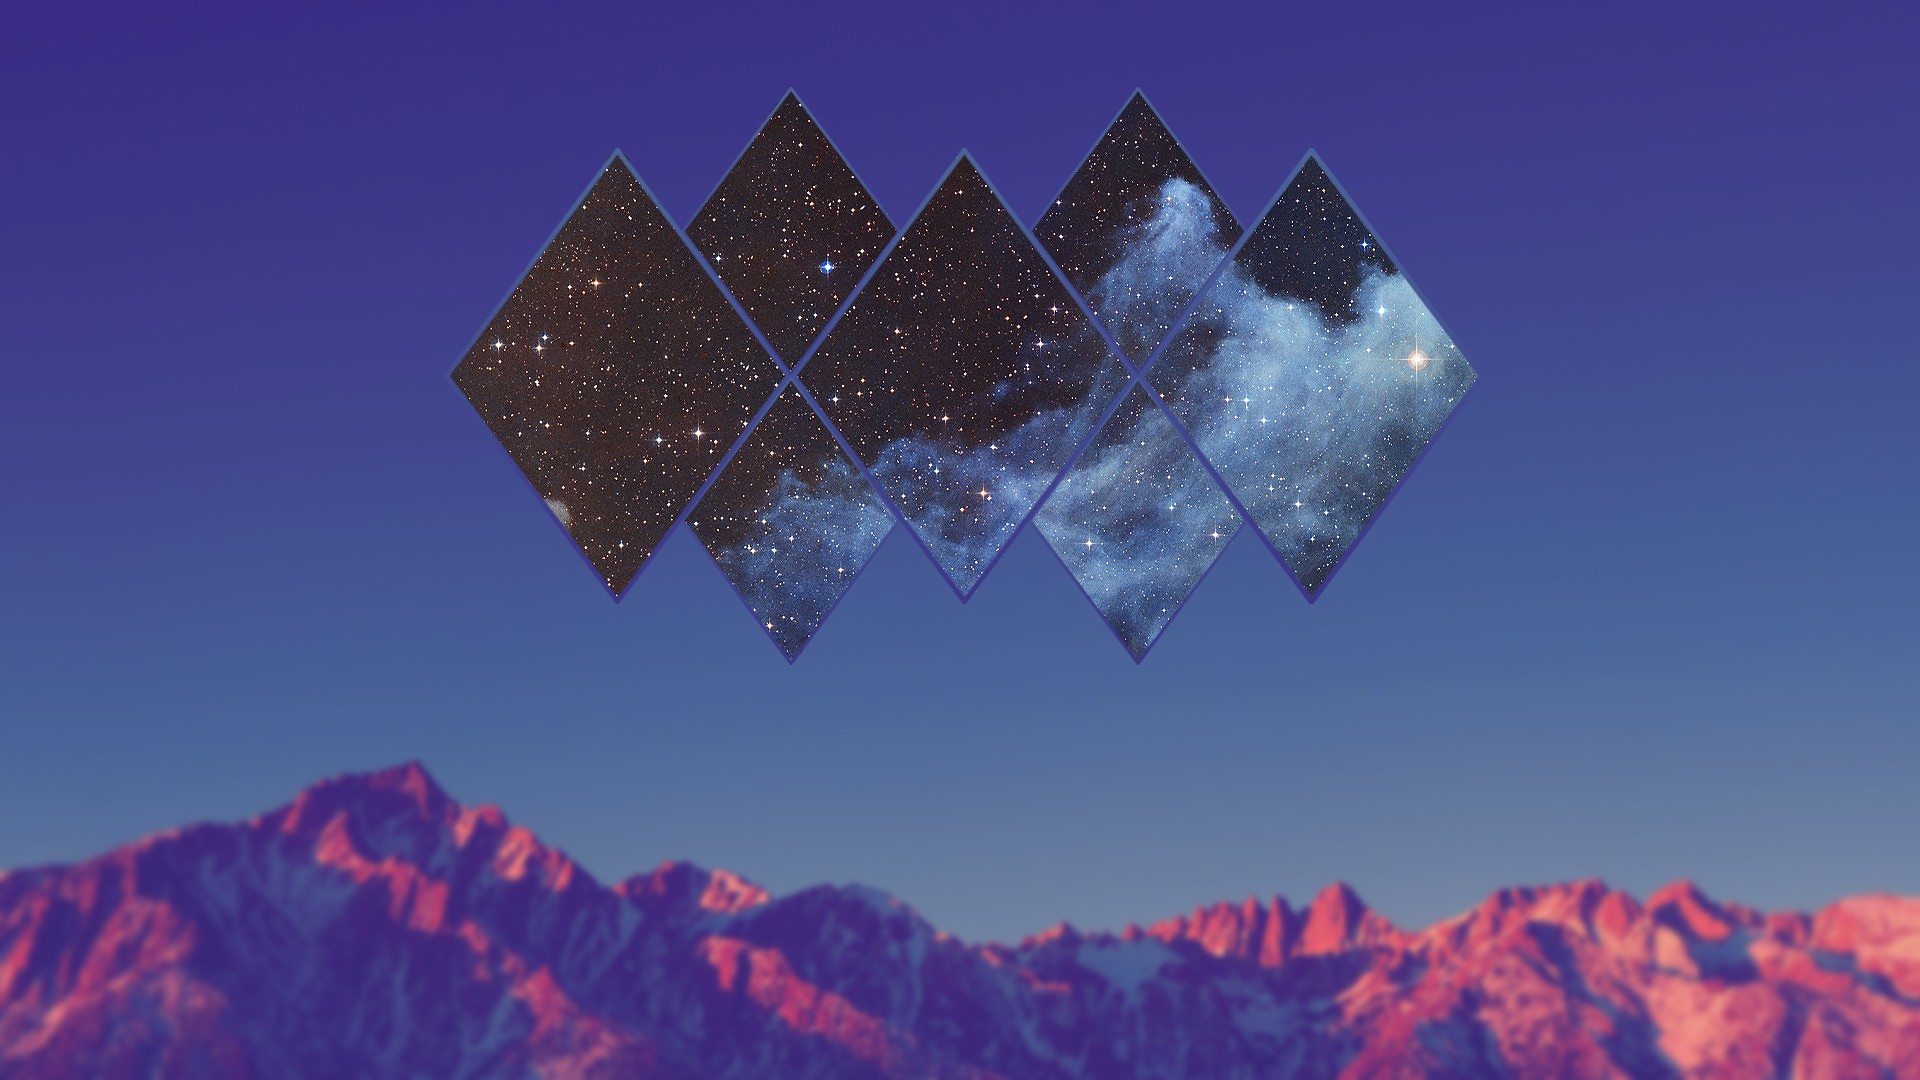 space, Mountains, Blurred, Landscape Wallpaper